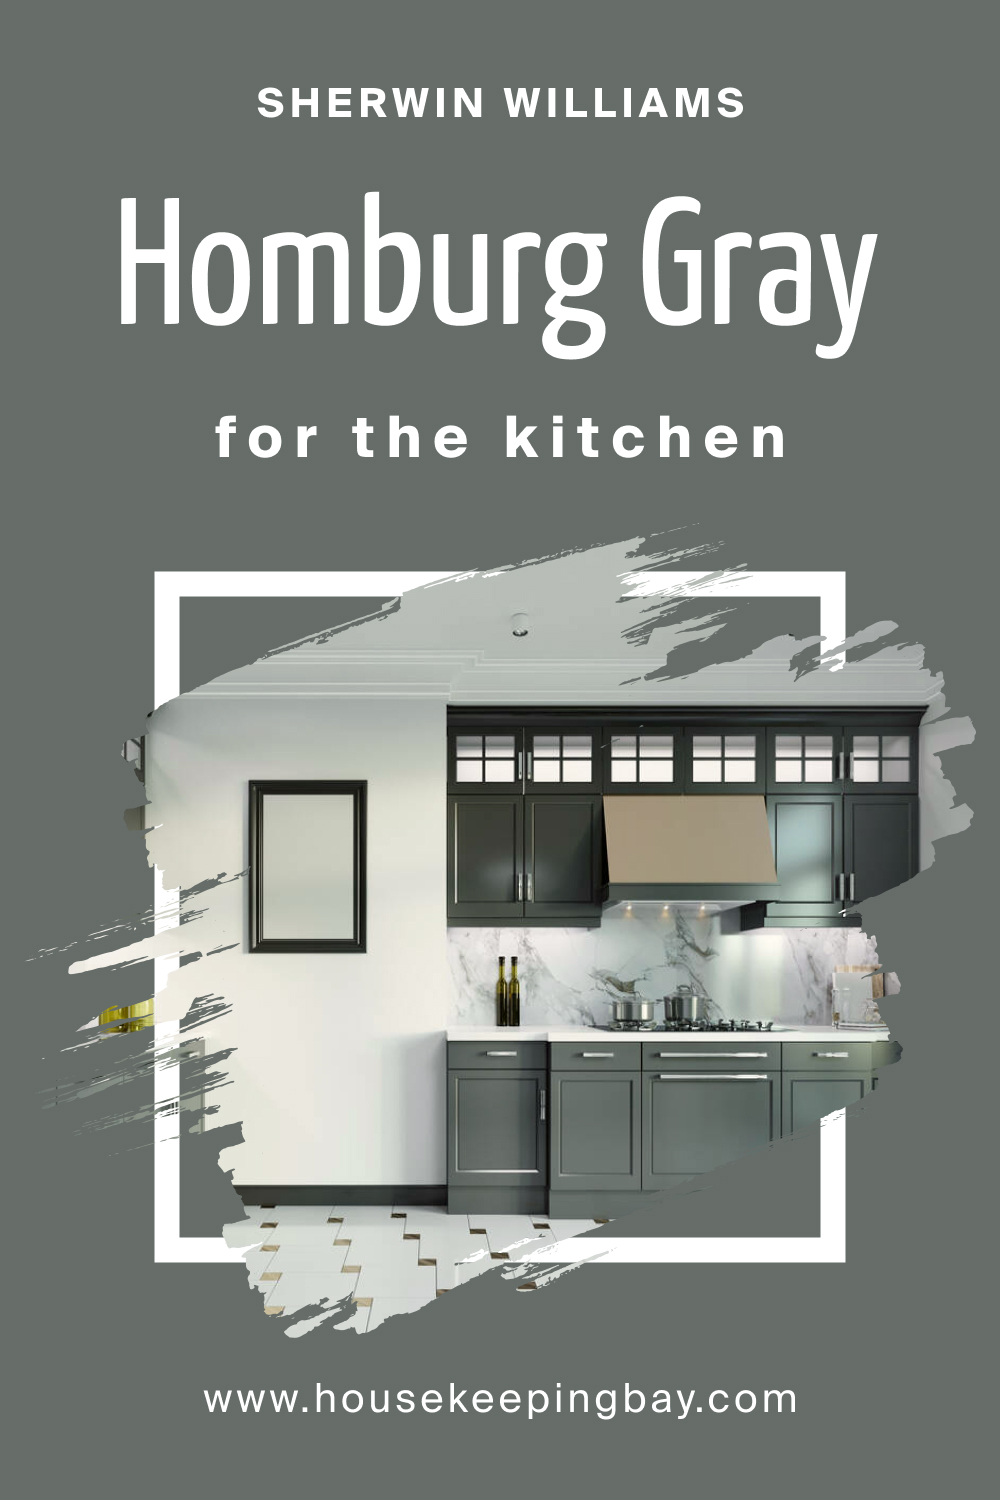 Sherwin Williams. SW 7622 Homburg Gray For the Kitchens